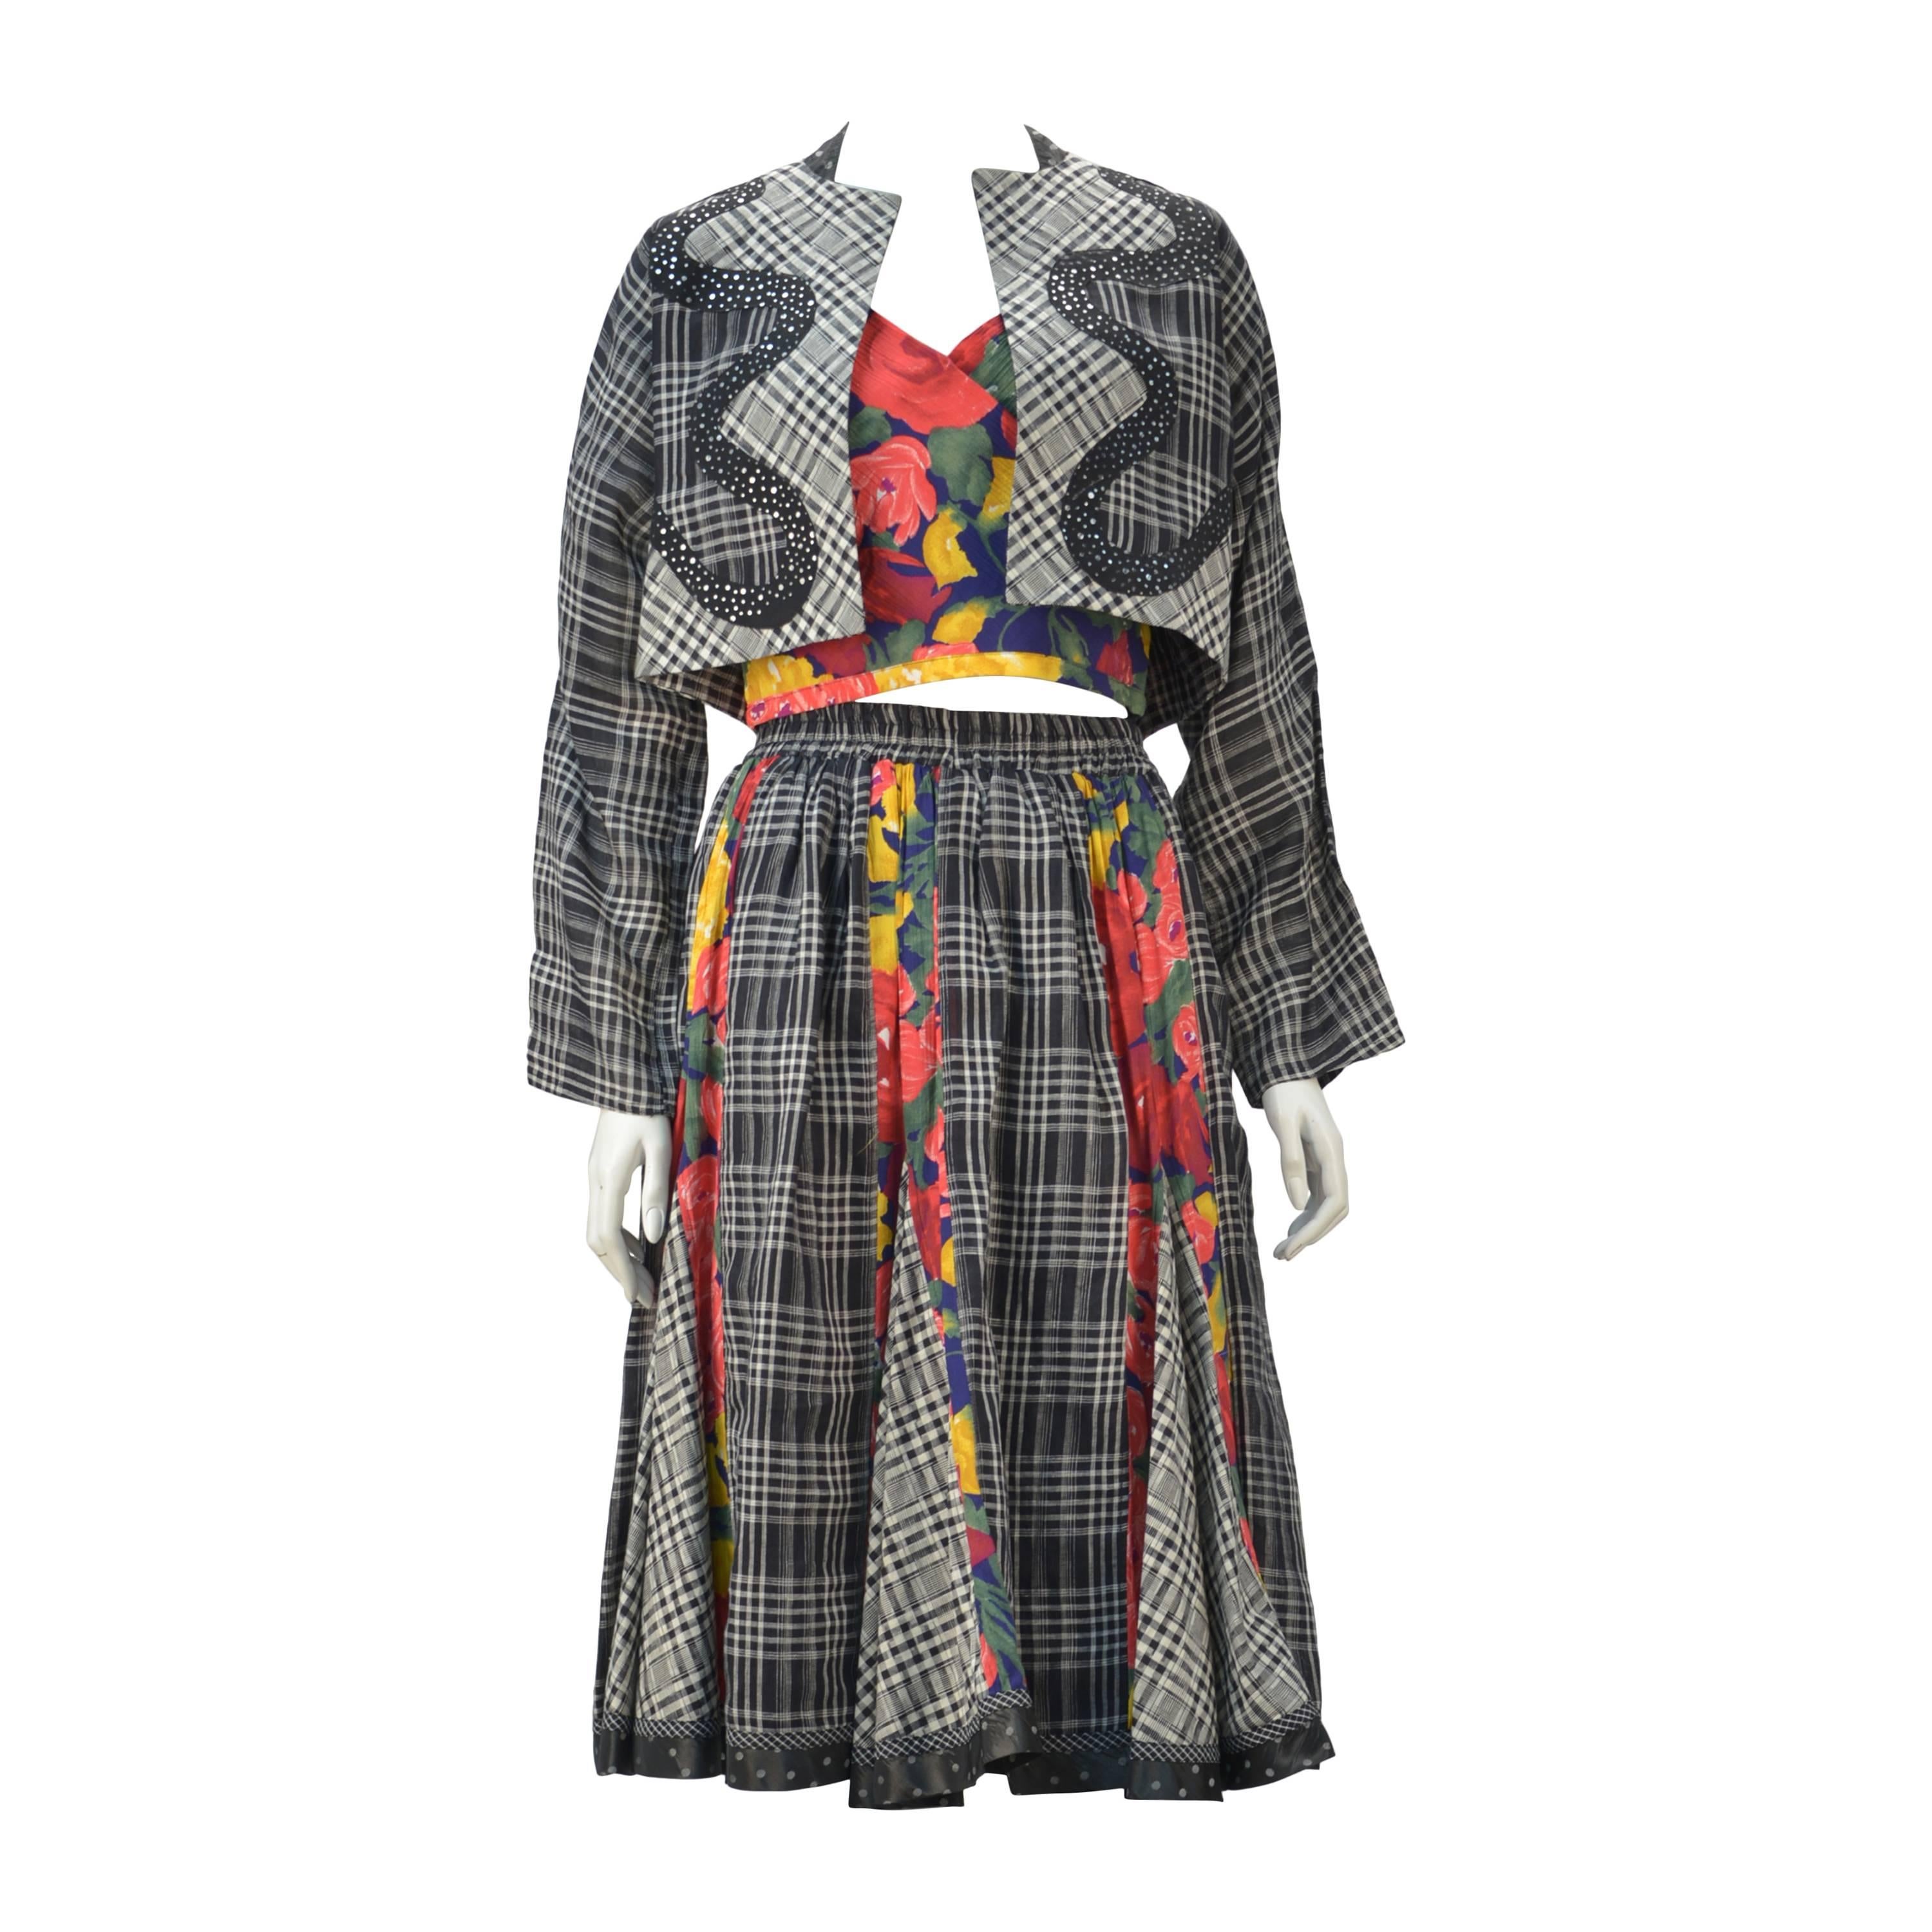 Fun and vibrant 1980's three piece halter top, skirt and crop jacket ensemble by recently deceased and unique designer Koos van den Akker.  Worked for Christian Dior before traveling home to his native home in the Hague, Netherlands.  With an